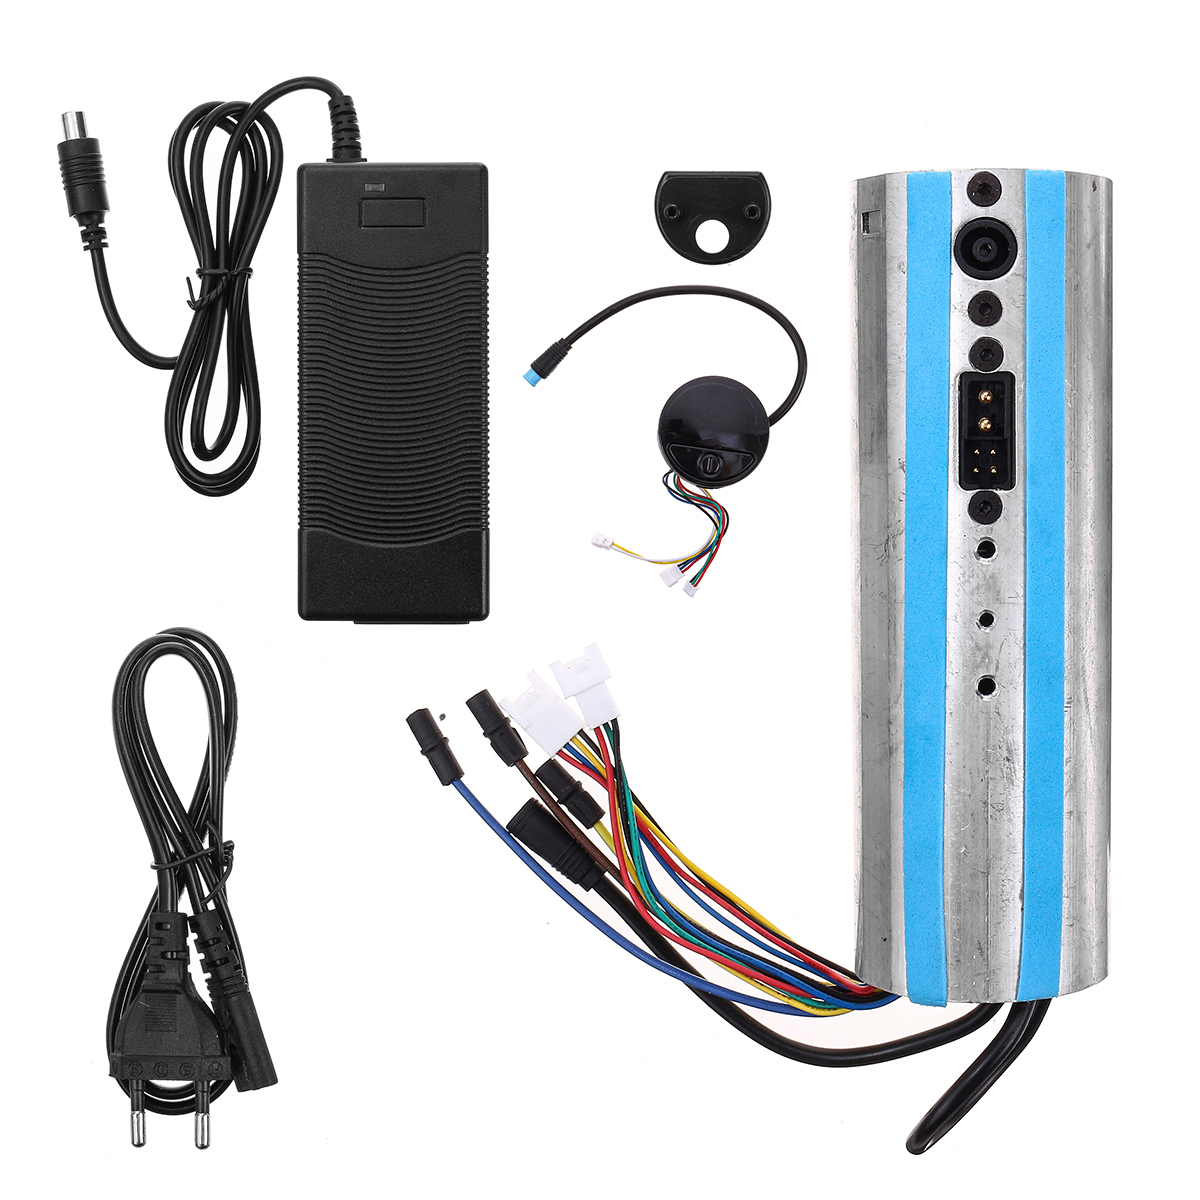 Activated Bluetooth Controller Board Dashboard Charger for Ninebot ES1 ES2 ES3 ES4 Scooter - Auto GoShop